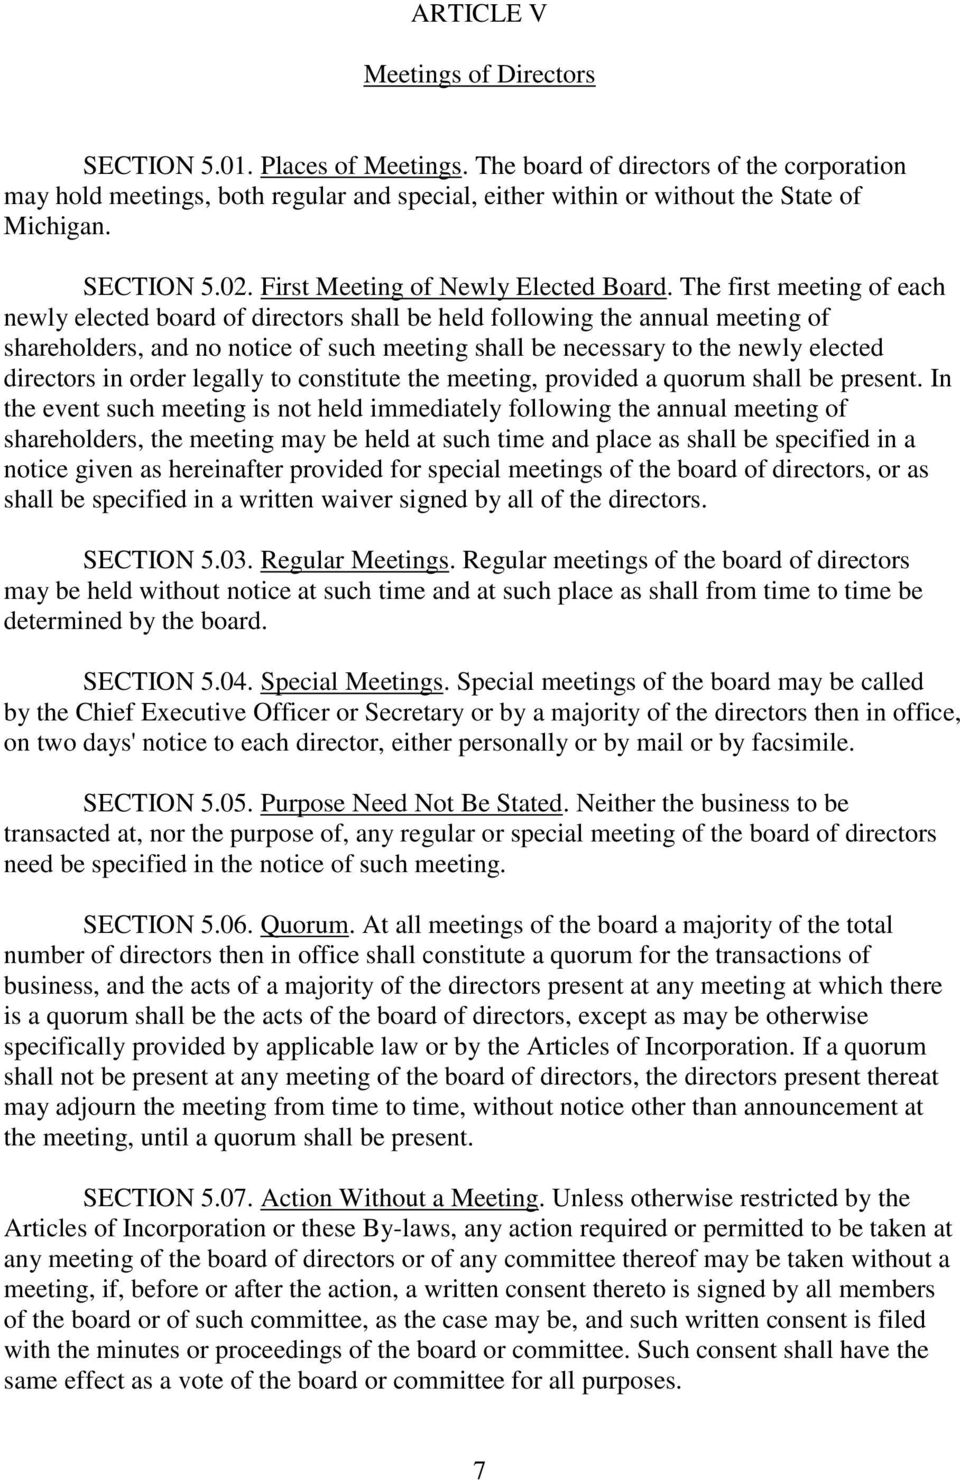 The first meeting of each newly elected board of directors shall be held following the annual meeting of shareholders, and no notice of such meeting shall be necessary to the newly elected directors